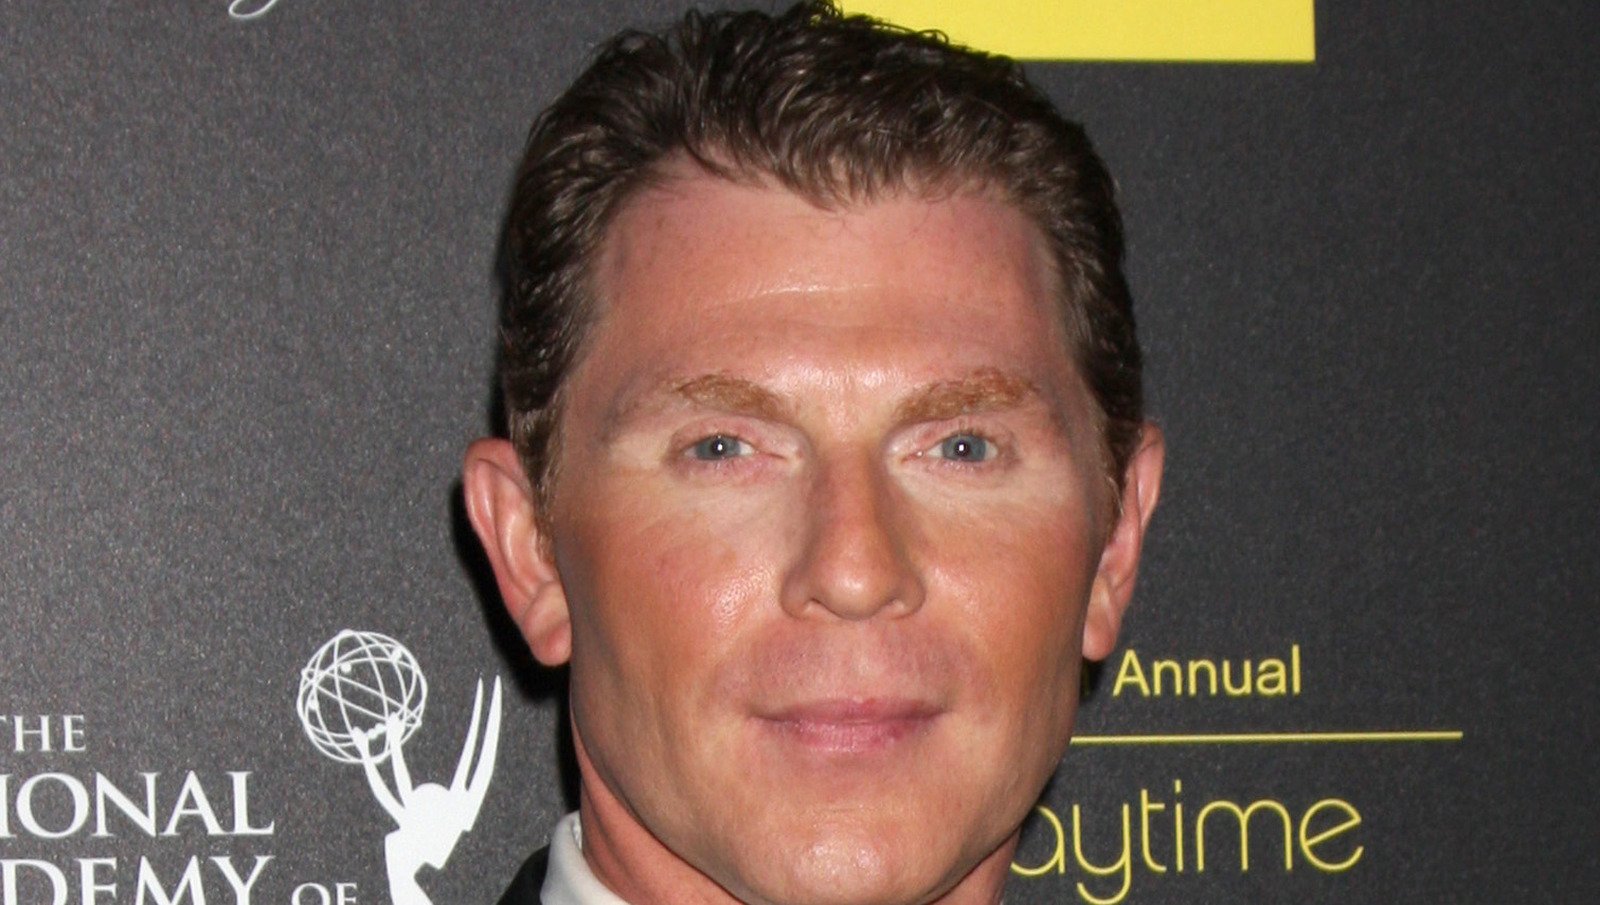 Bobby Flay's Most Embarrassing On-Screen Moments - Mashed